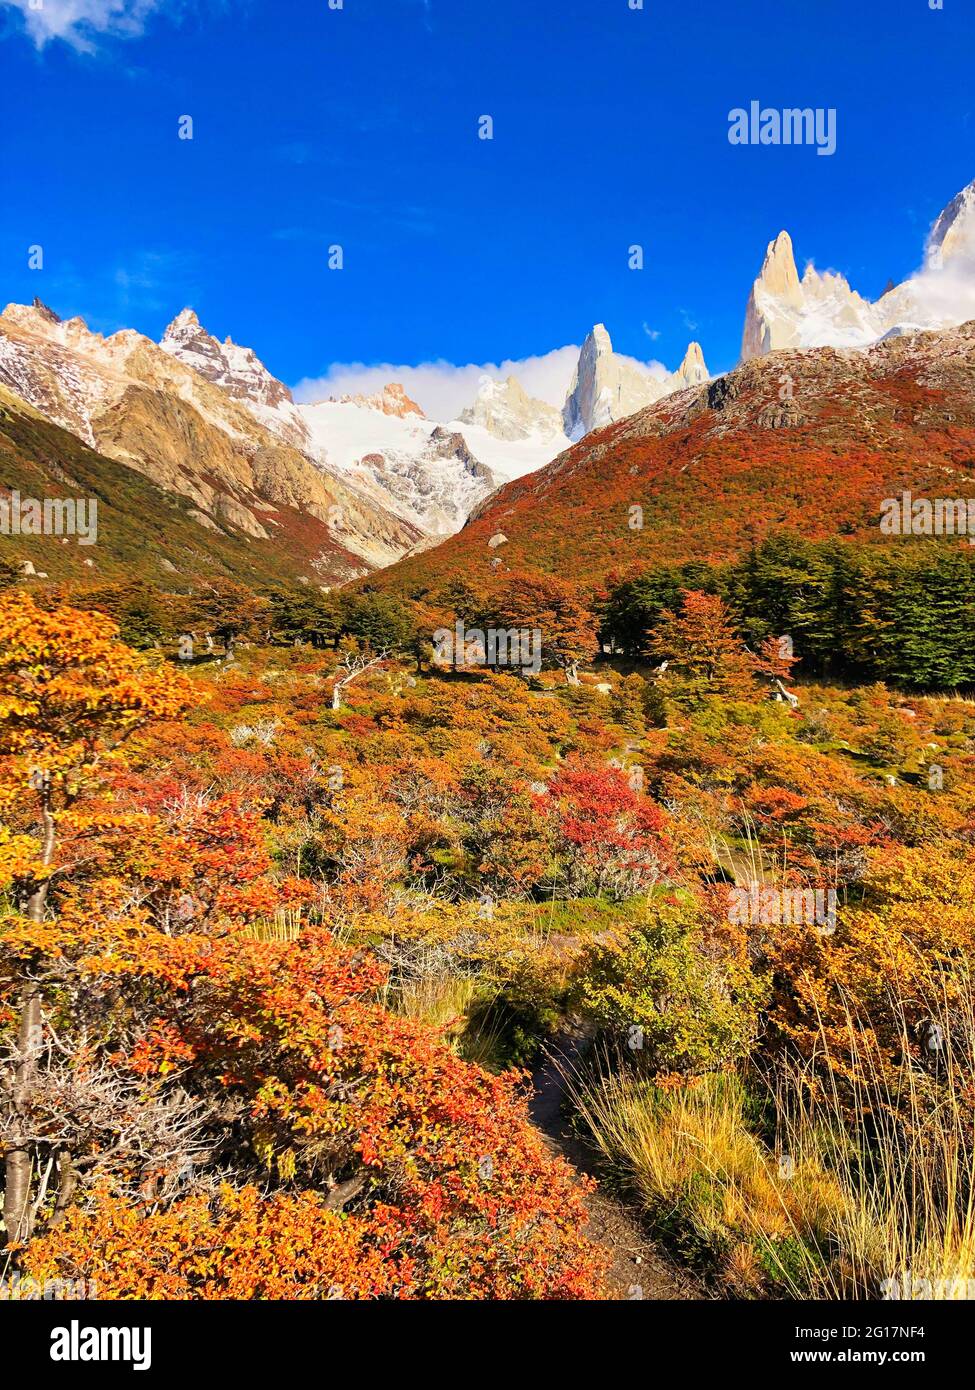 South America-Patagonia- Chile and Argentina. Views of Fitz Roy, Torres del Payne, Glacier Rivers and Fall colors. Stock Photo